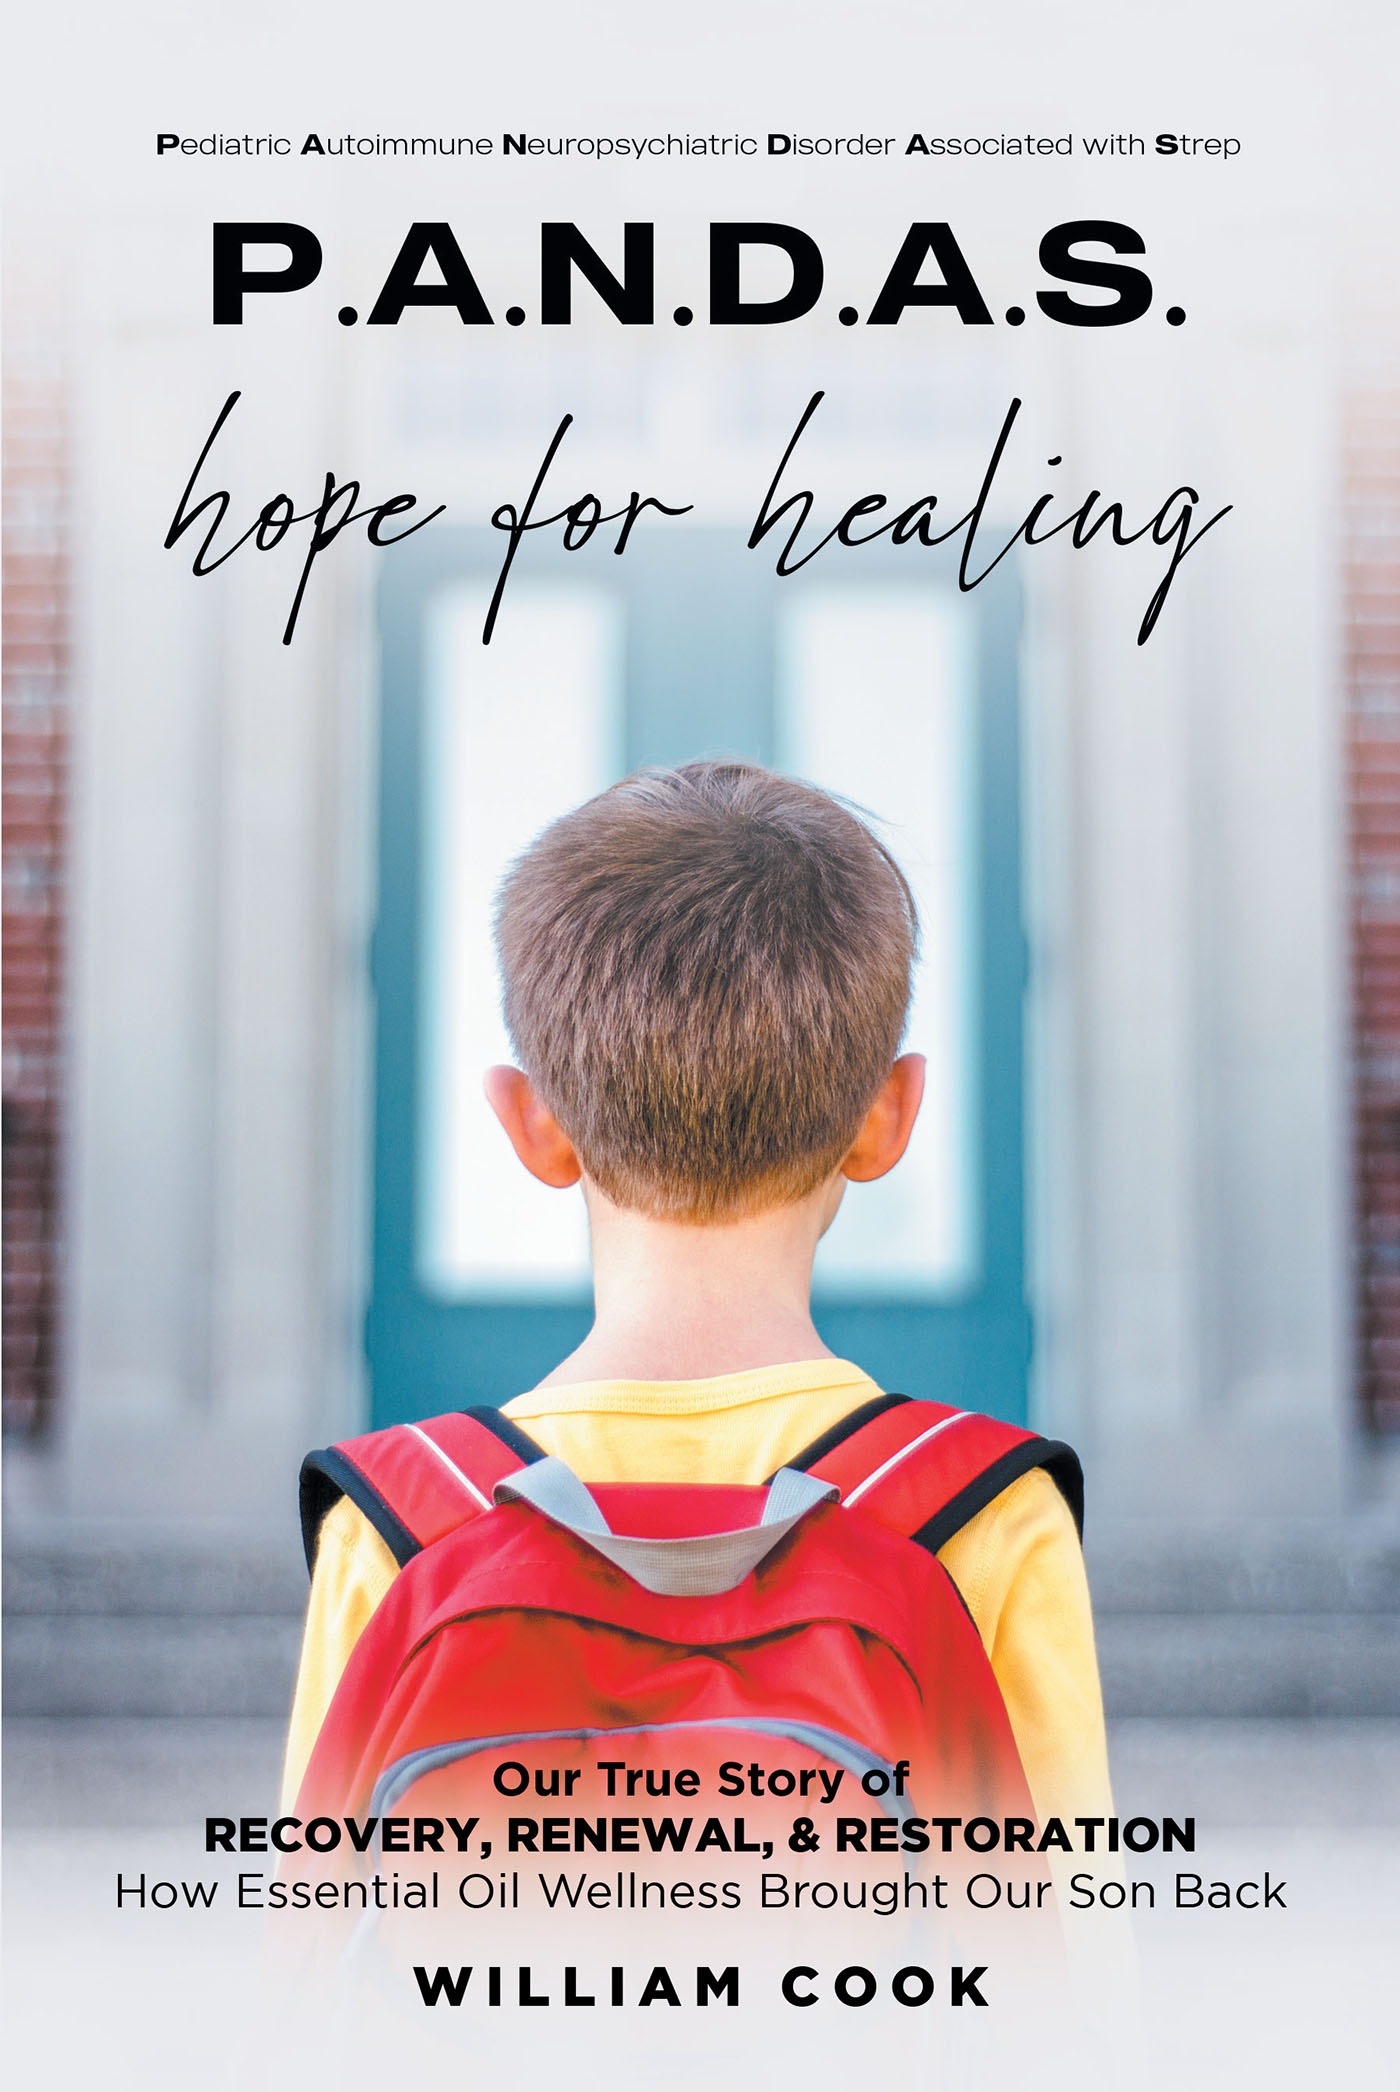 William Cook’s New Book "P.A.N.D.A.S. hope for healing" is an Eye-Opening True Story of the Author's Fight to Help His Son Recover from a Debilitating Autoimmune Illness